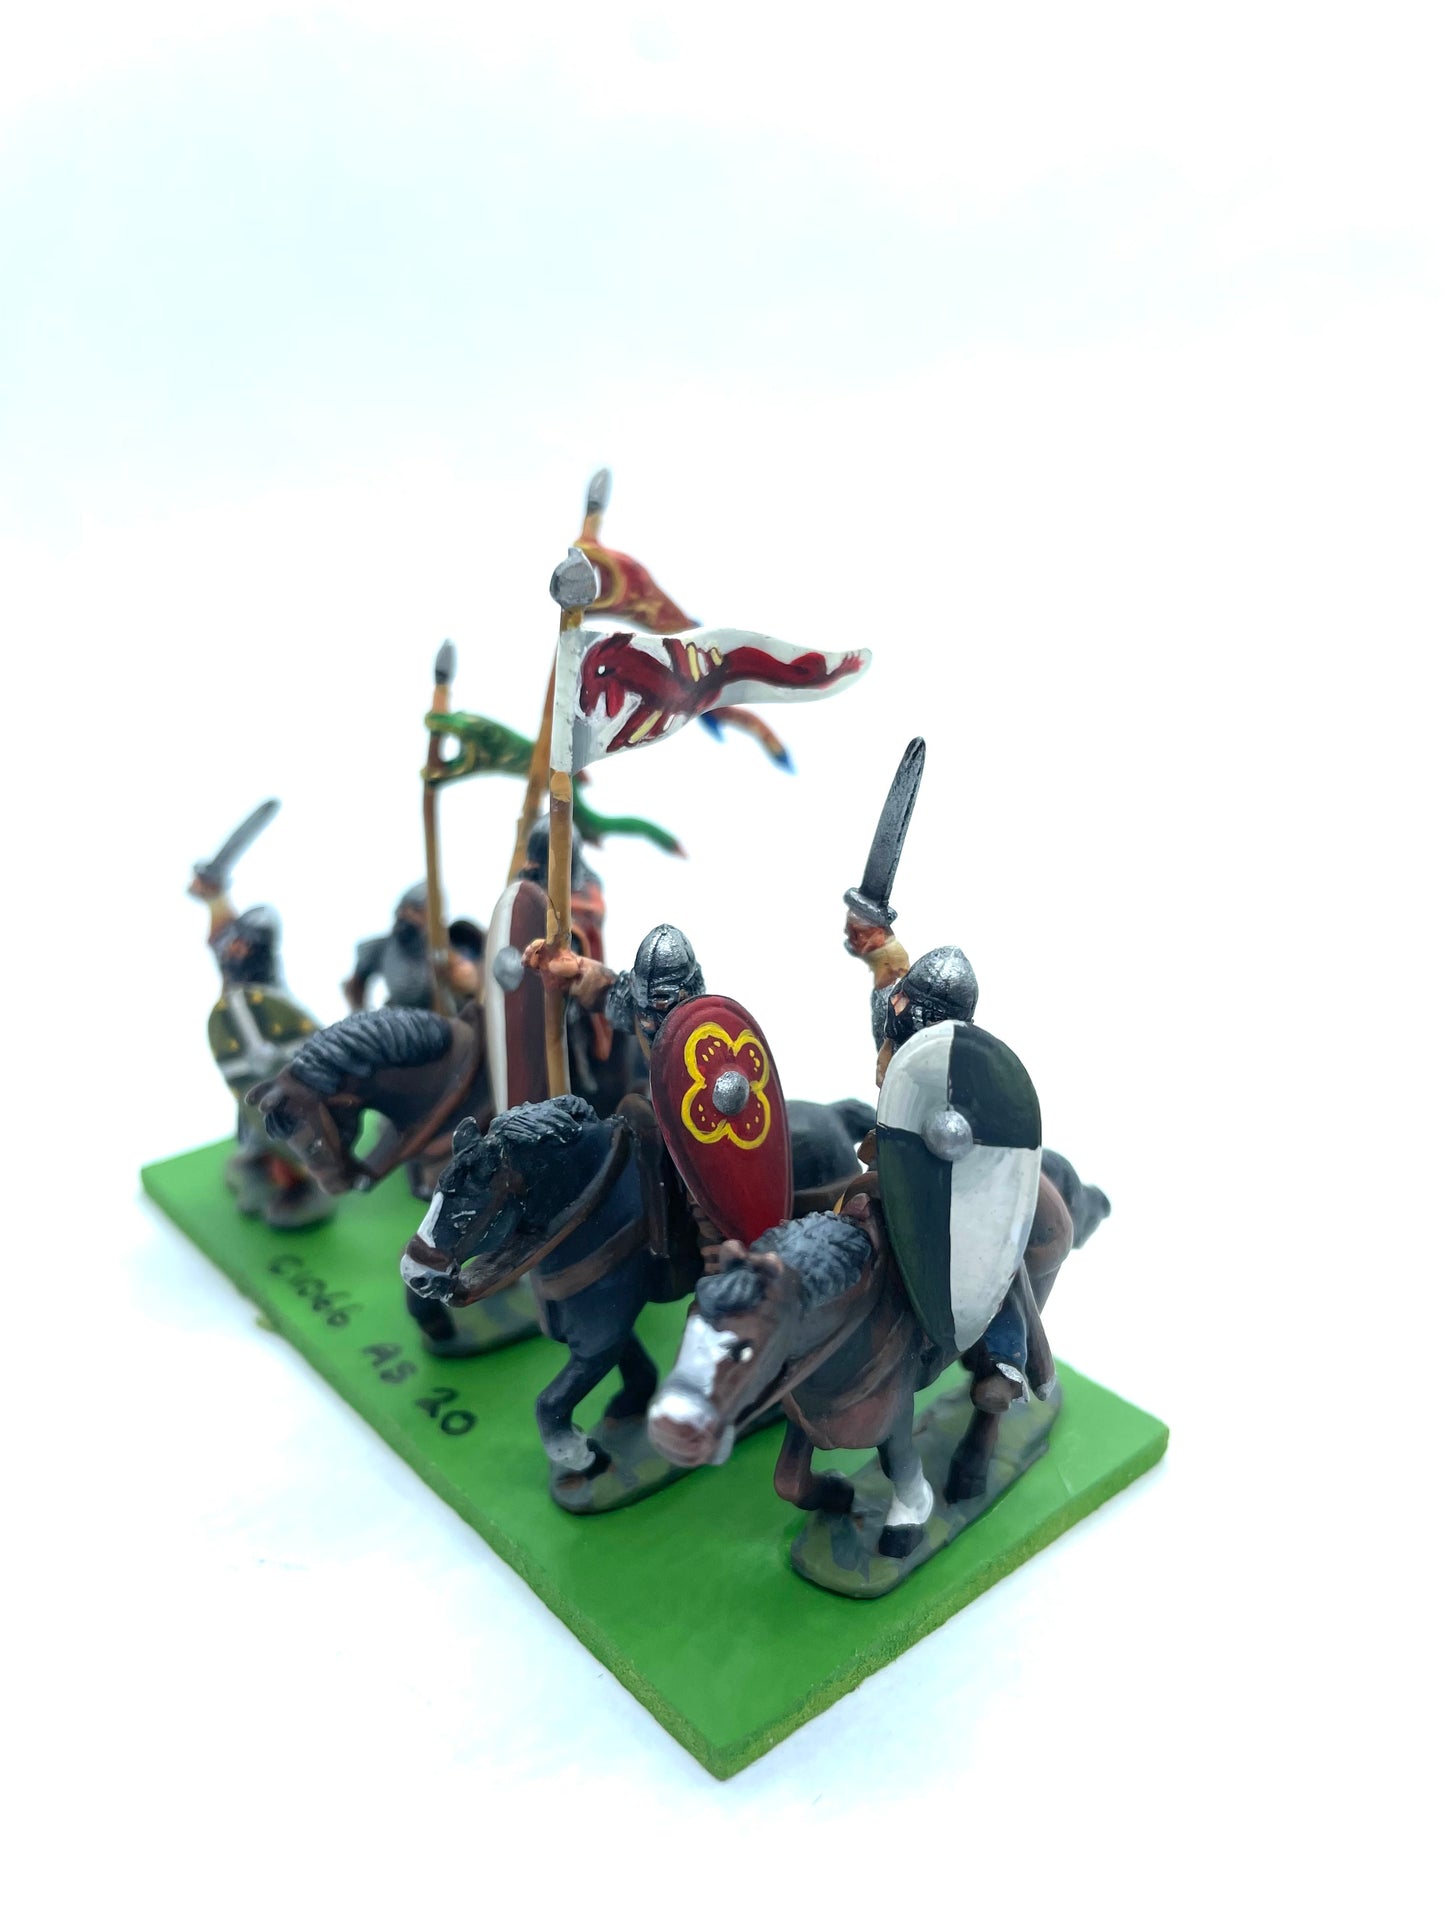 AS20. Anglo Saxon Command Pack